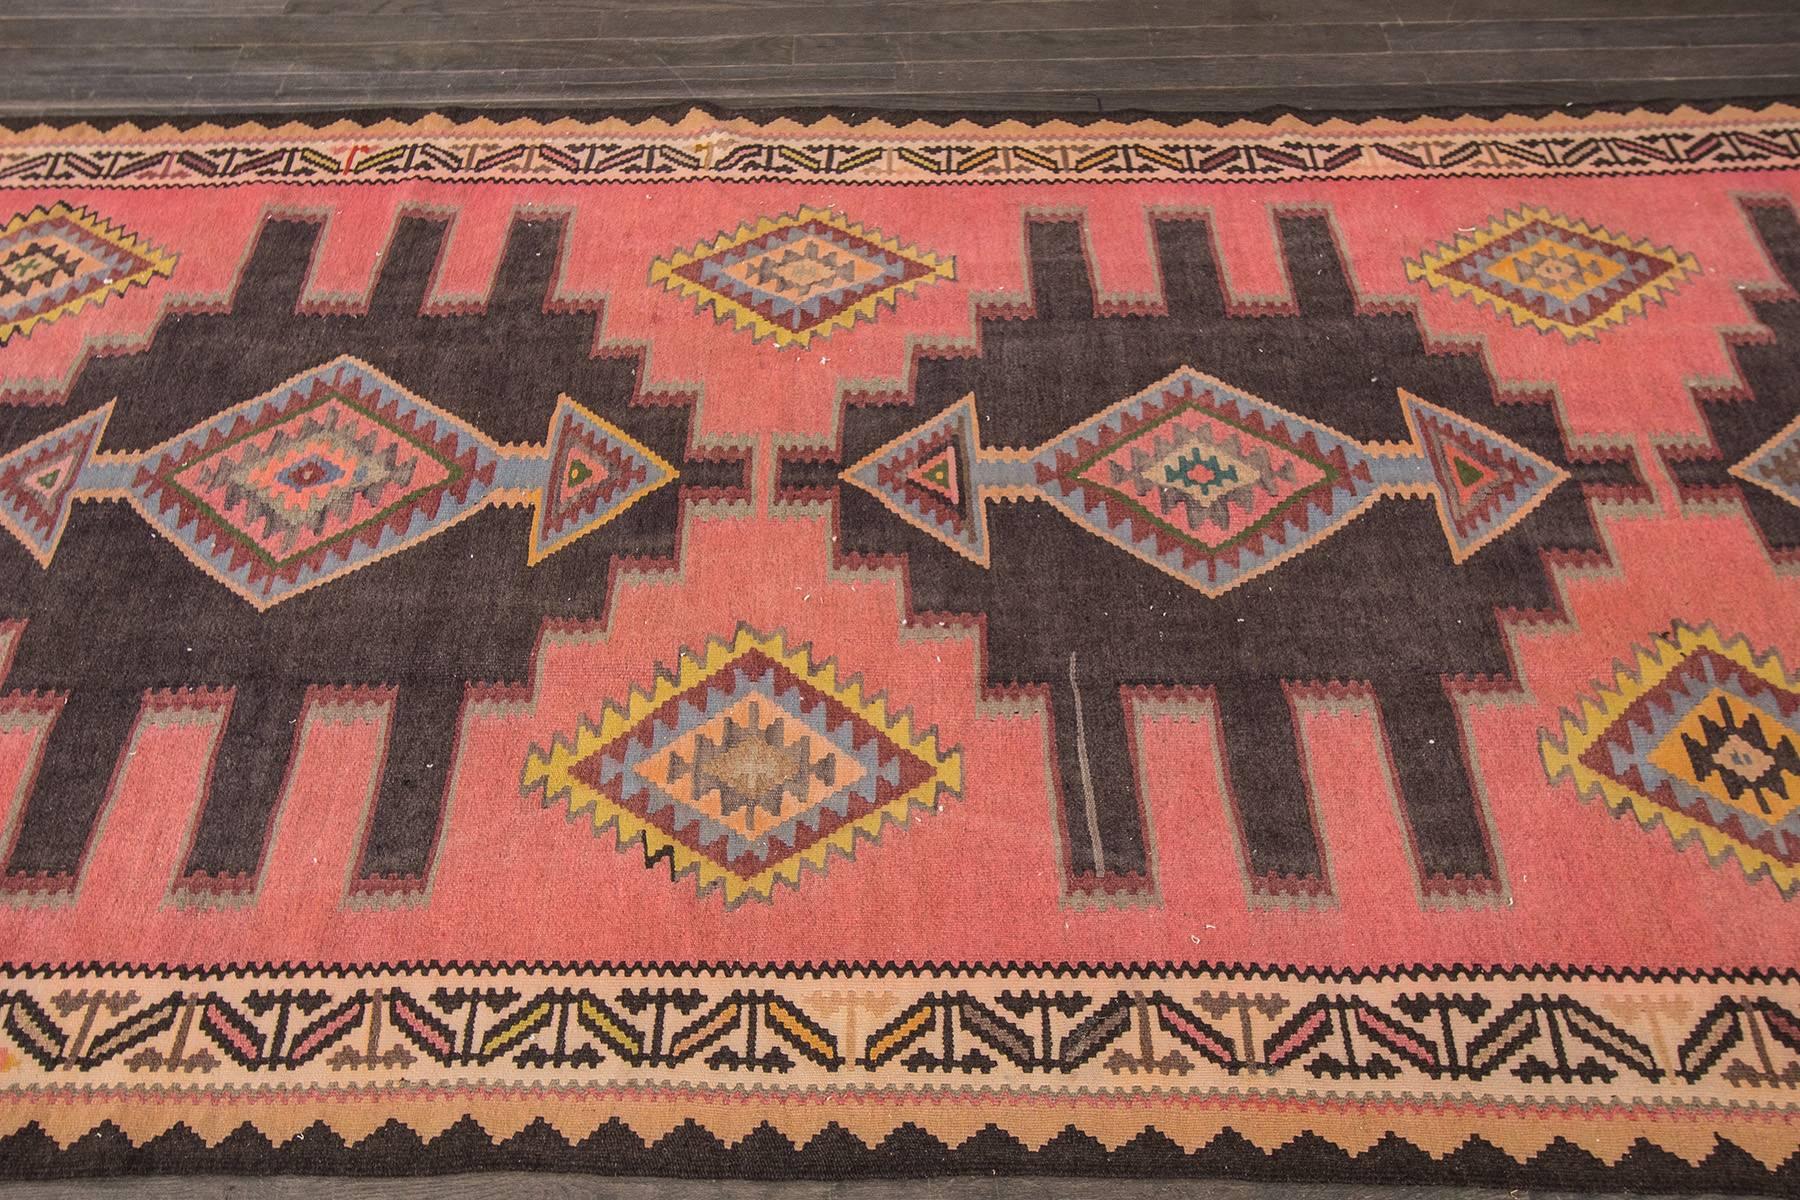 Contemporary Gorgeously Contrasted Persian Kilim Rug